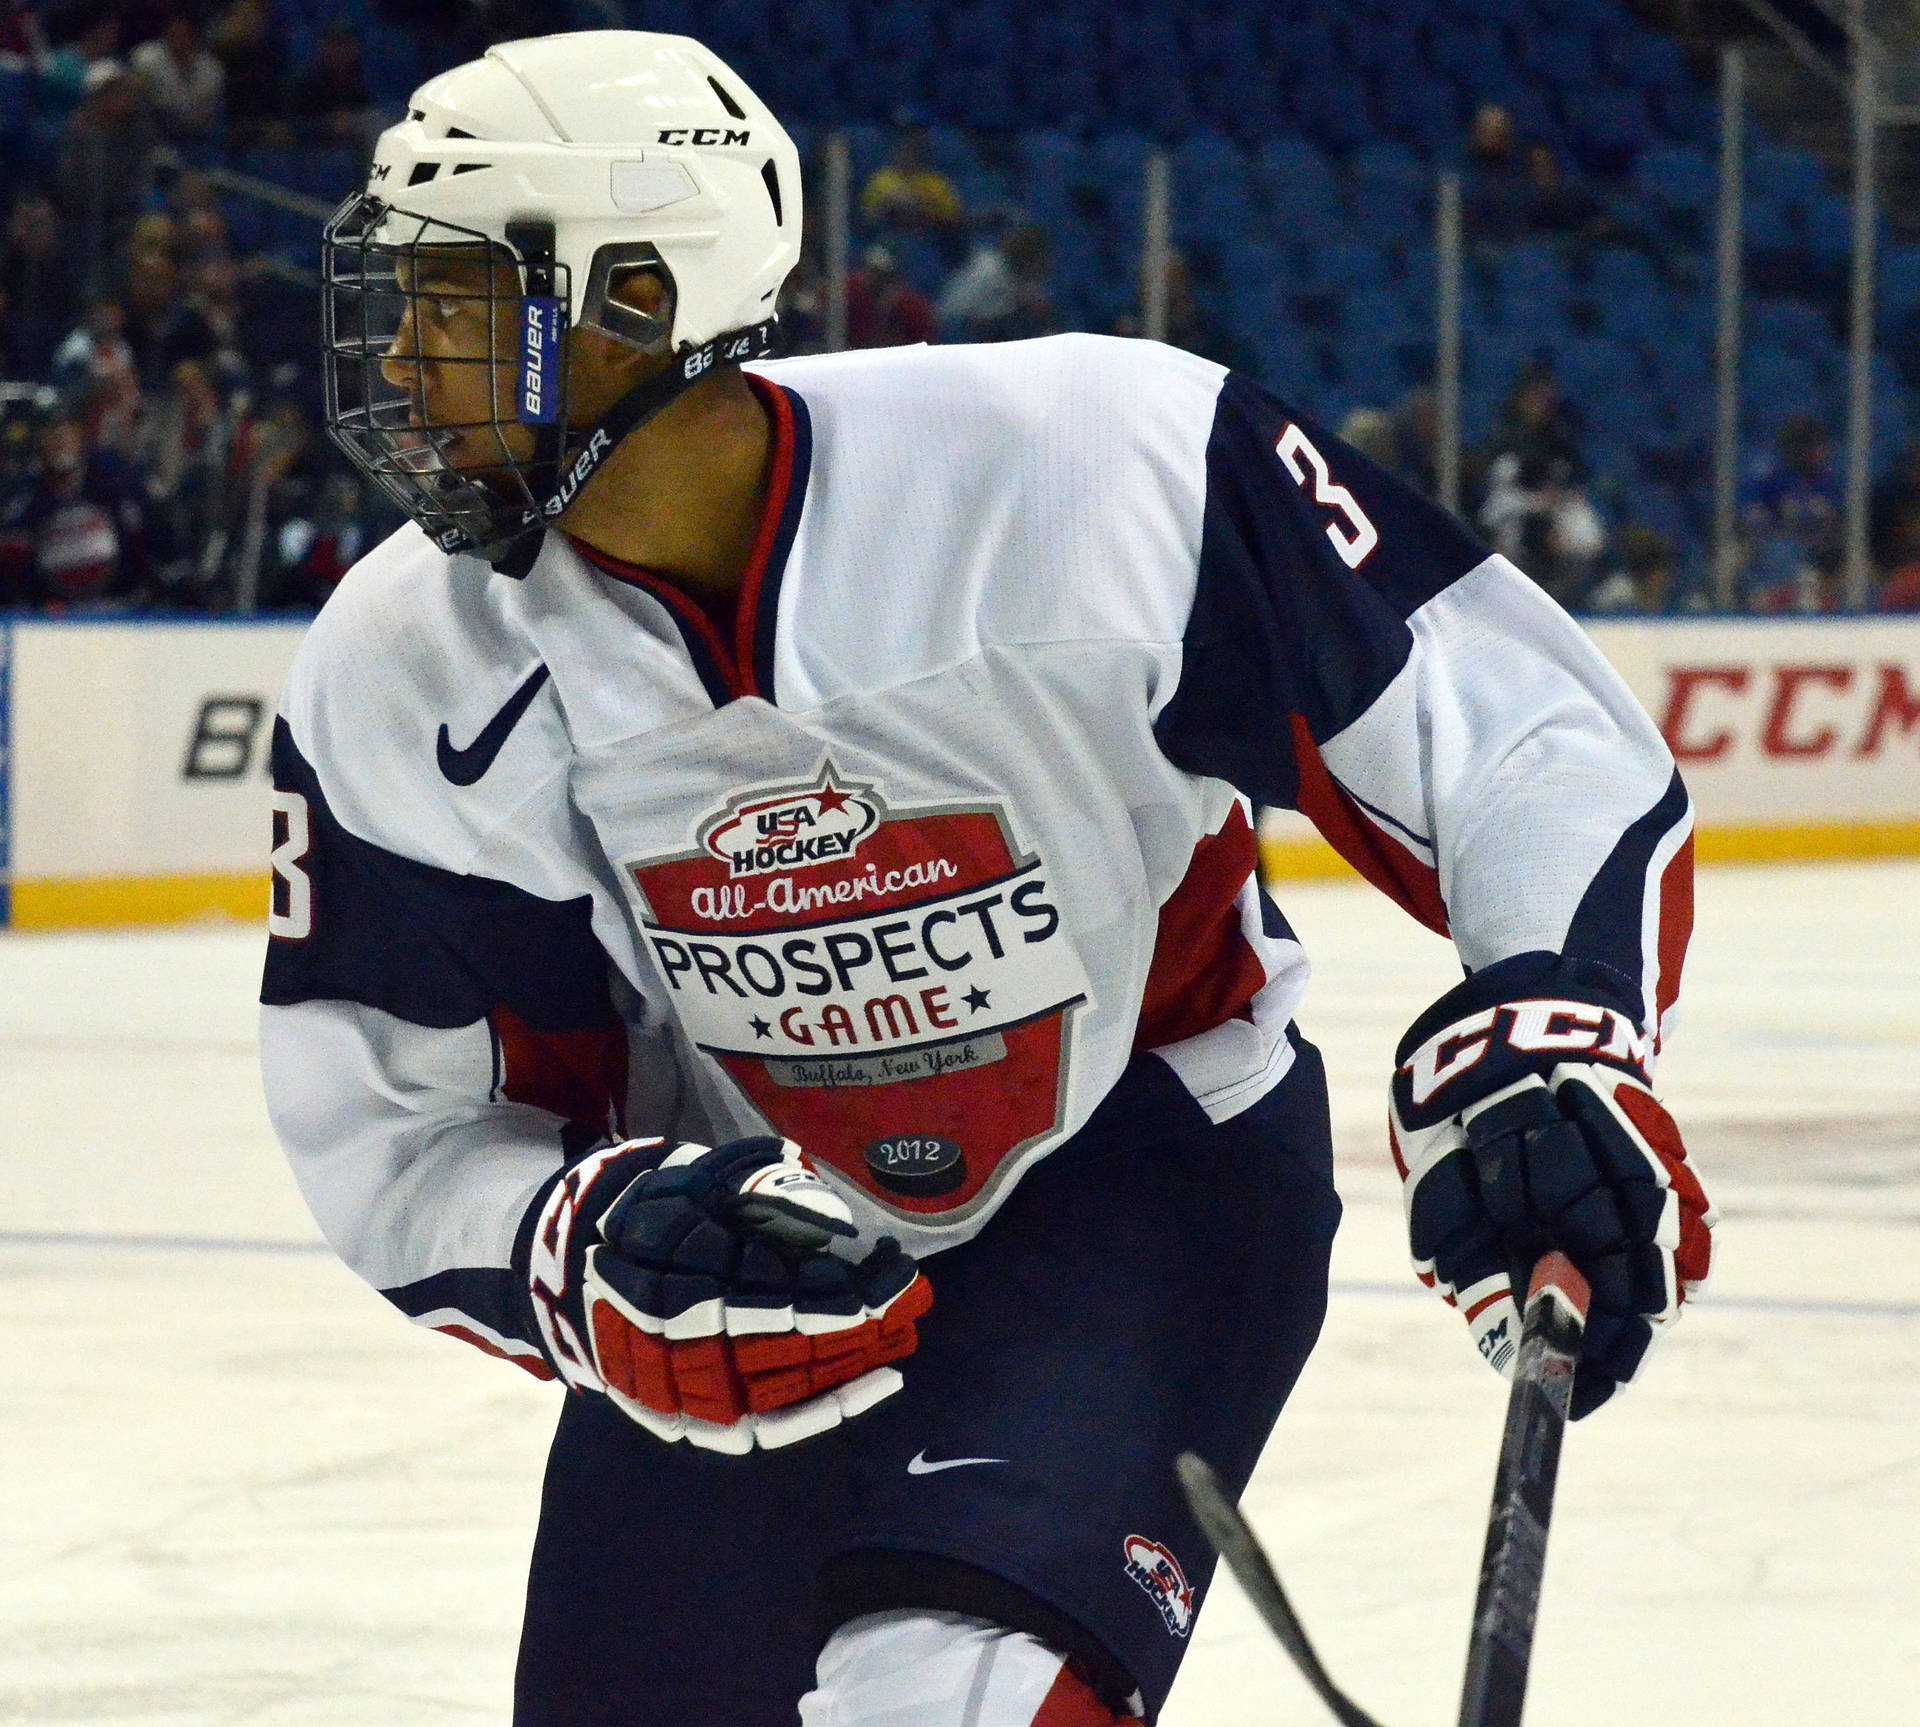 Seth Jones From Elite Prospects Looking To The Right During Hockey Game Background